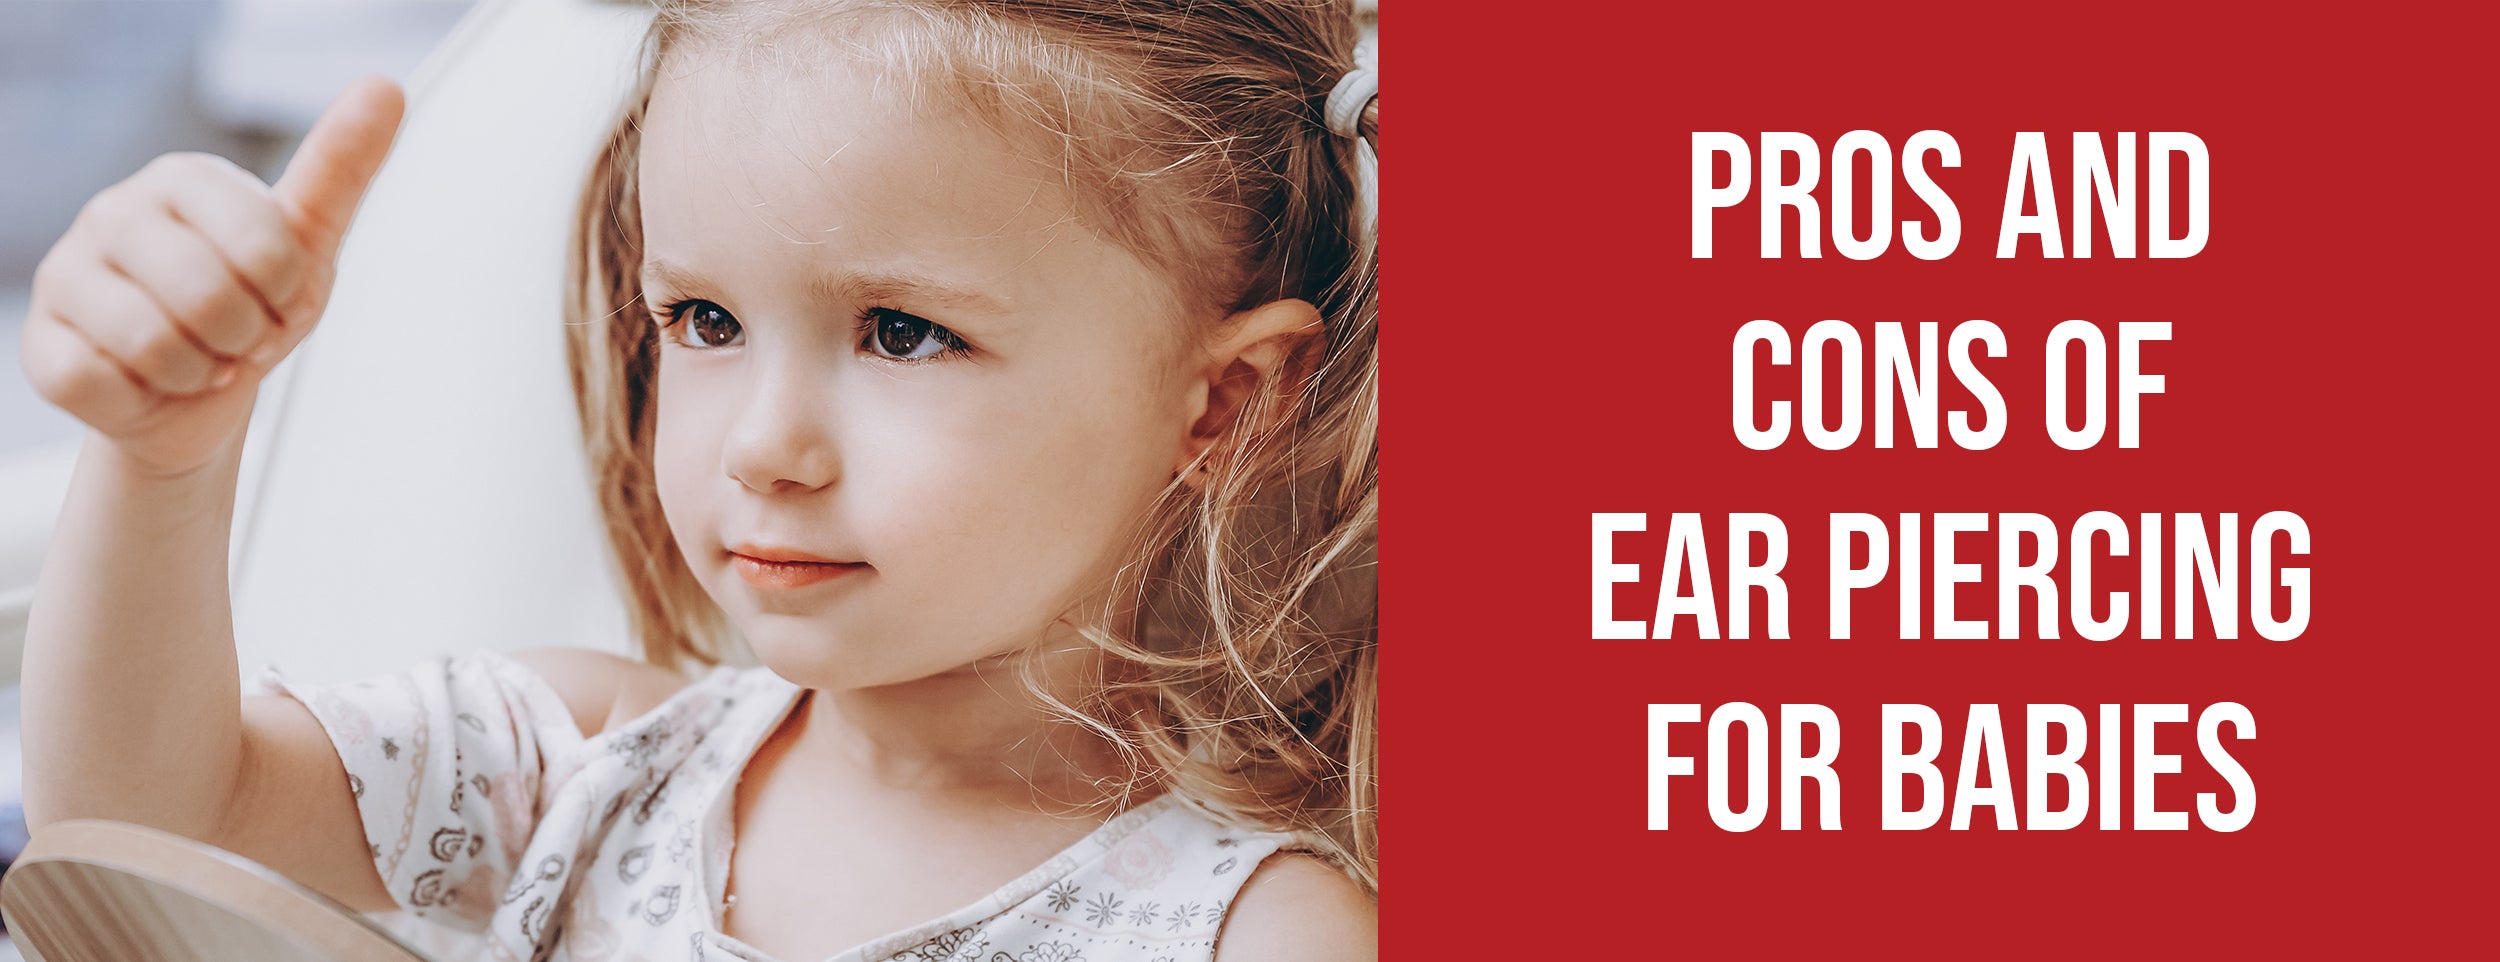 Baby ear piercing pros and cons